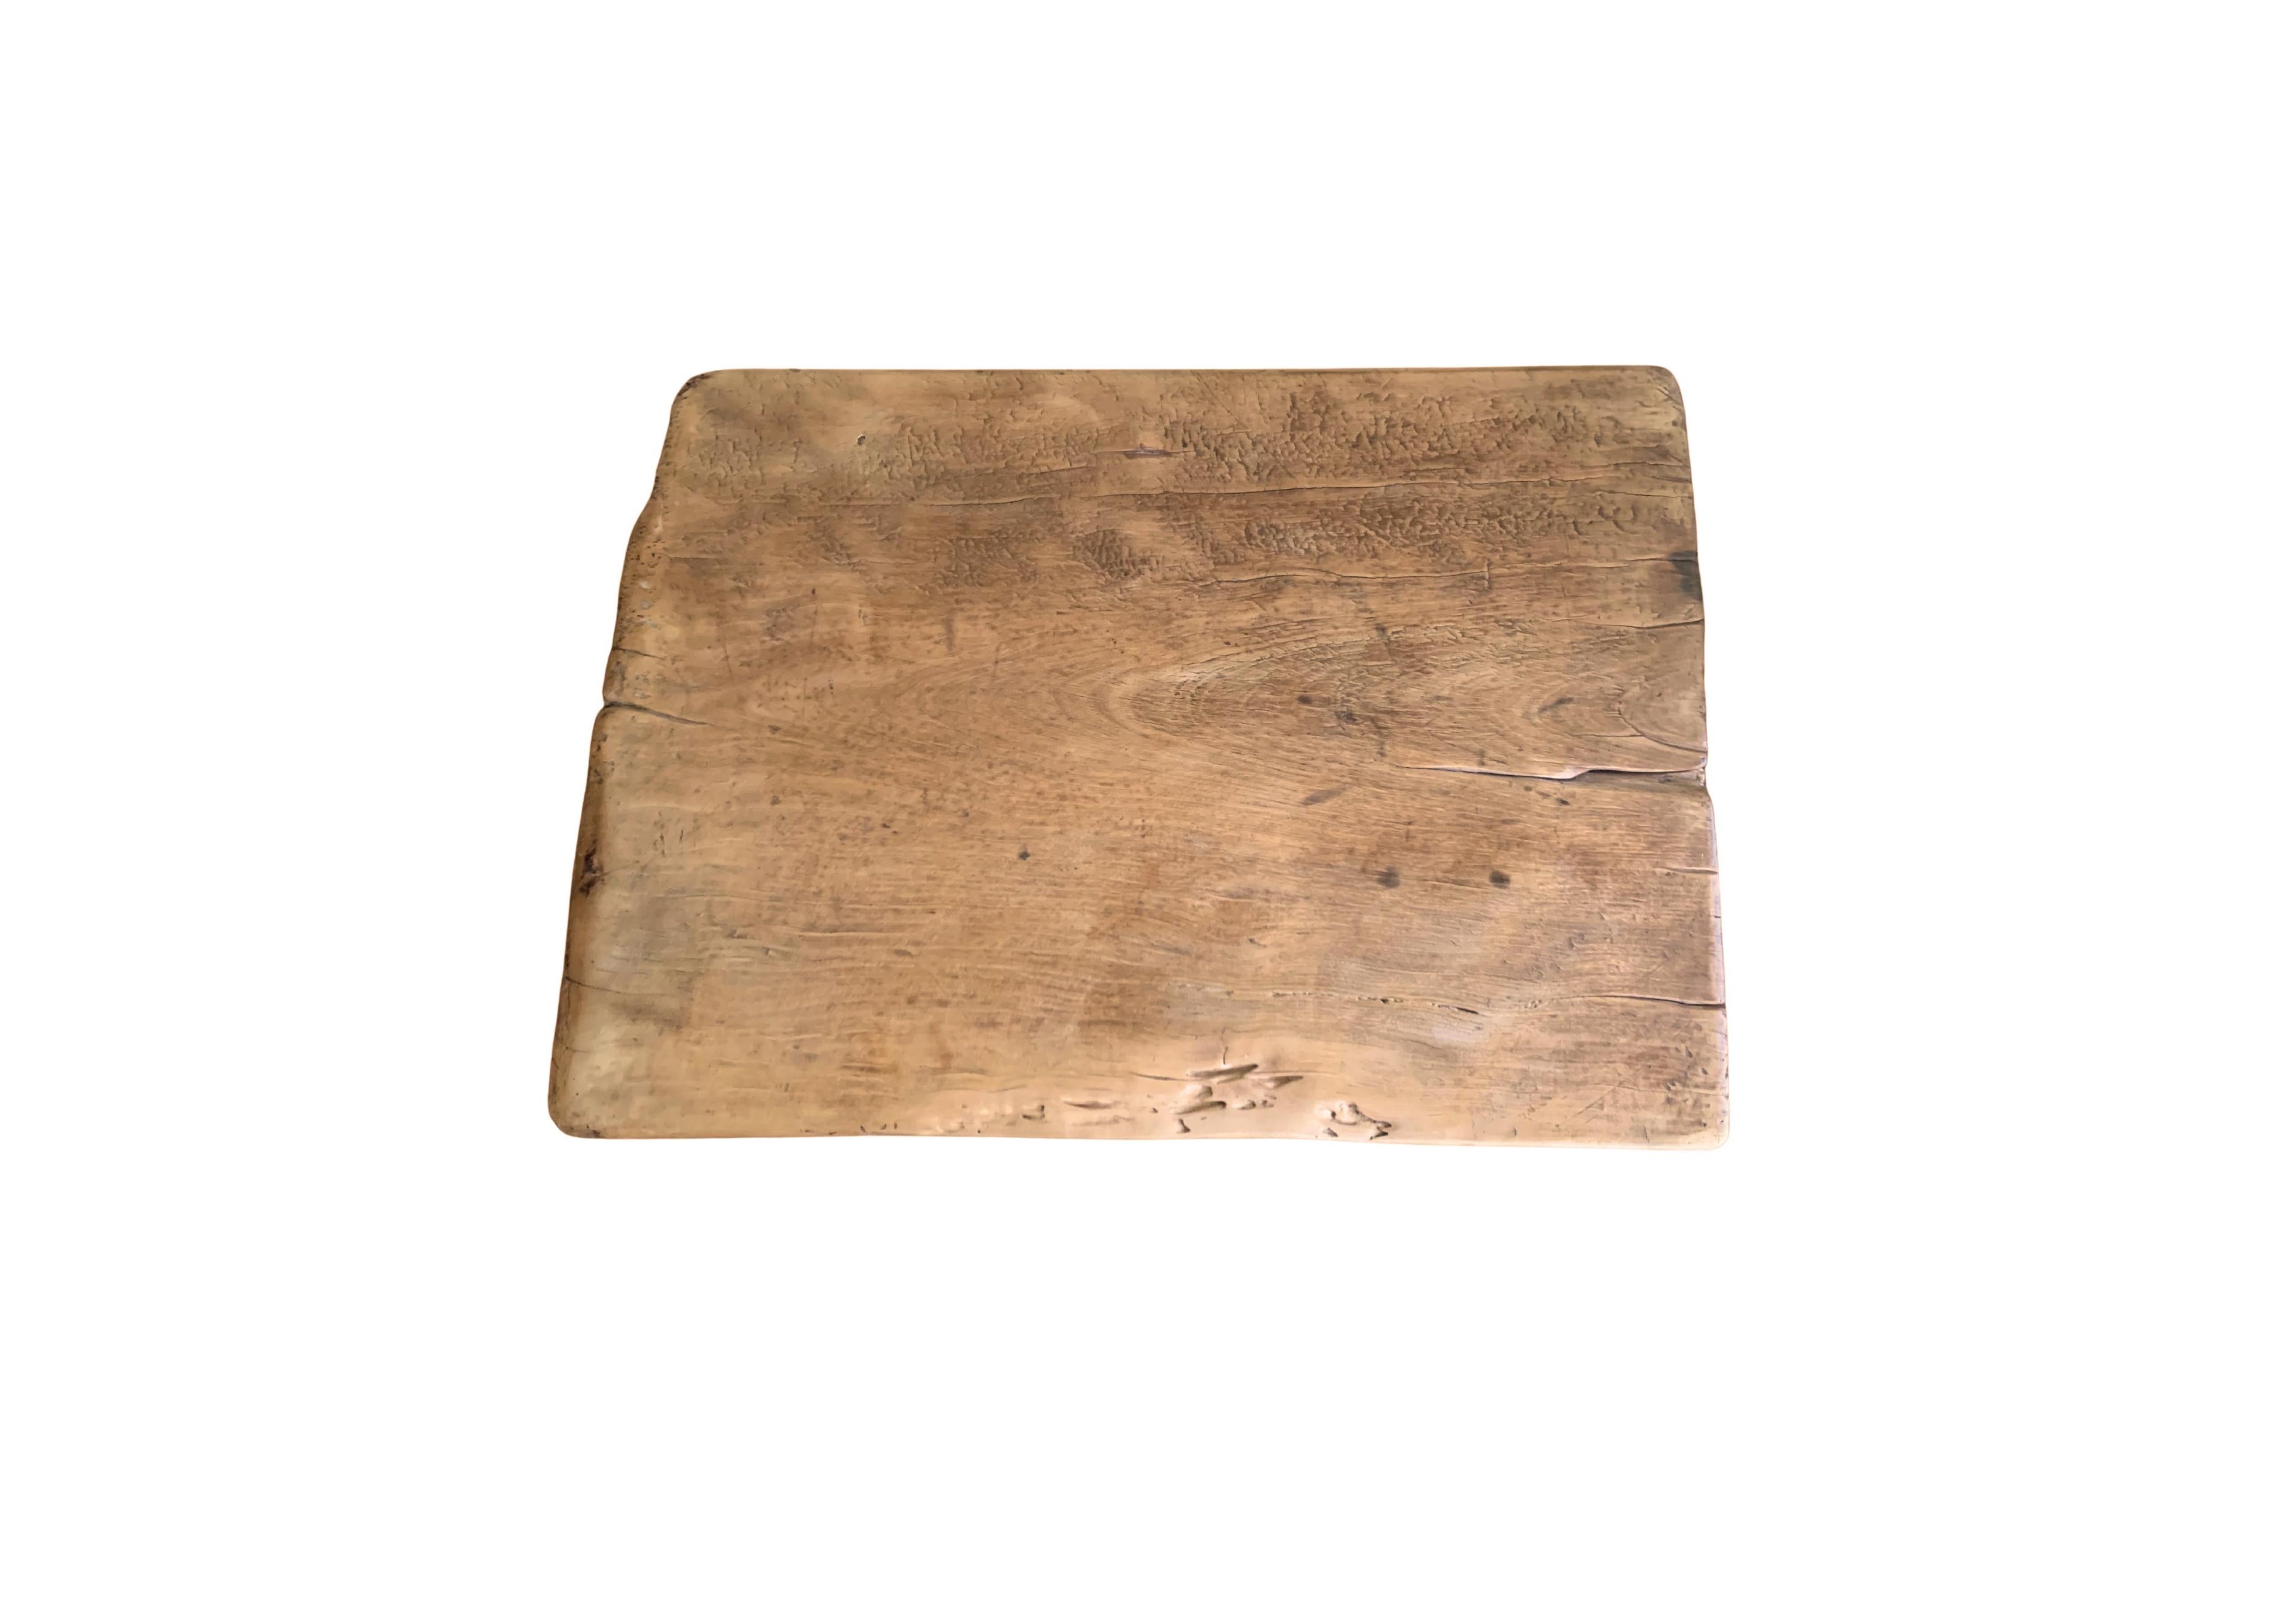 20th Century Antique Chinese Wooden Block / Chopping Block, Hand-Carved, c. 1900 For Sale